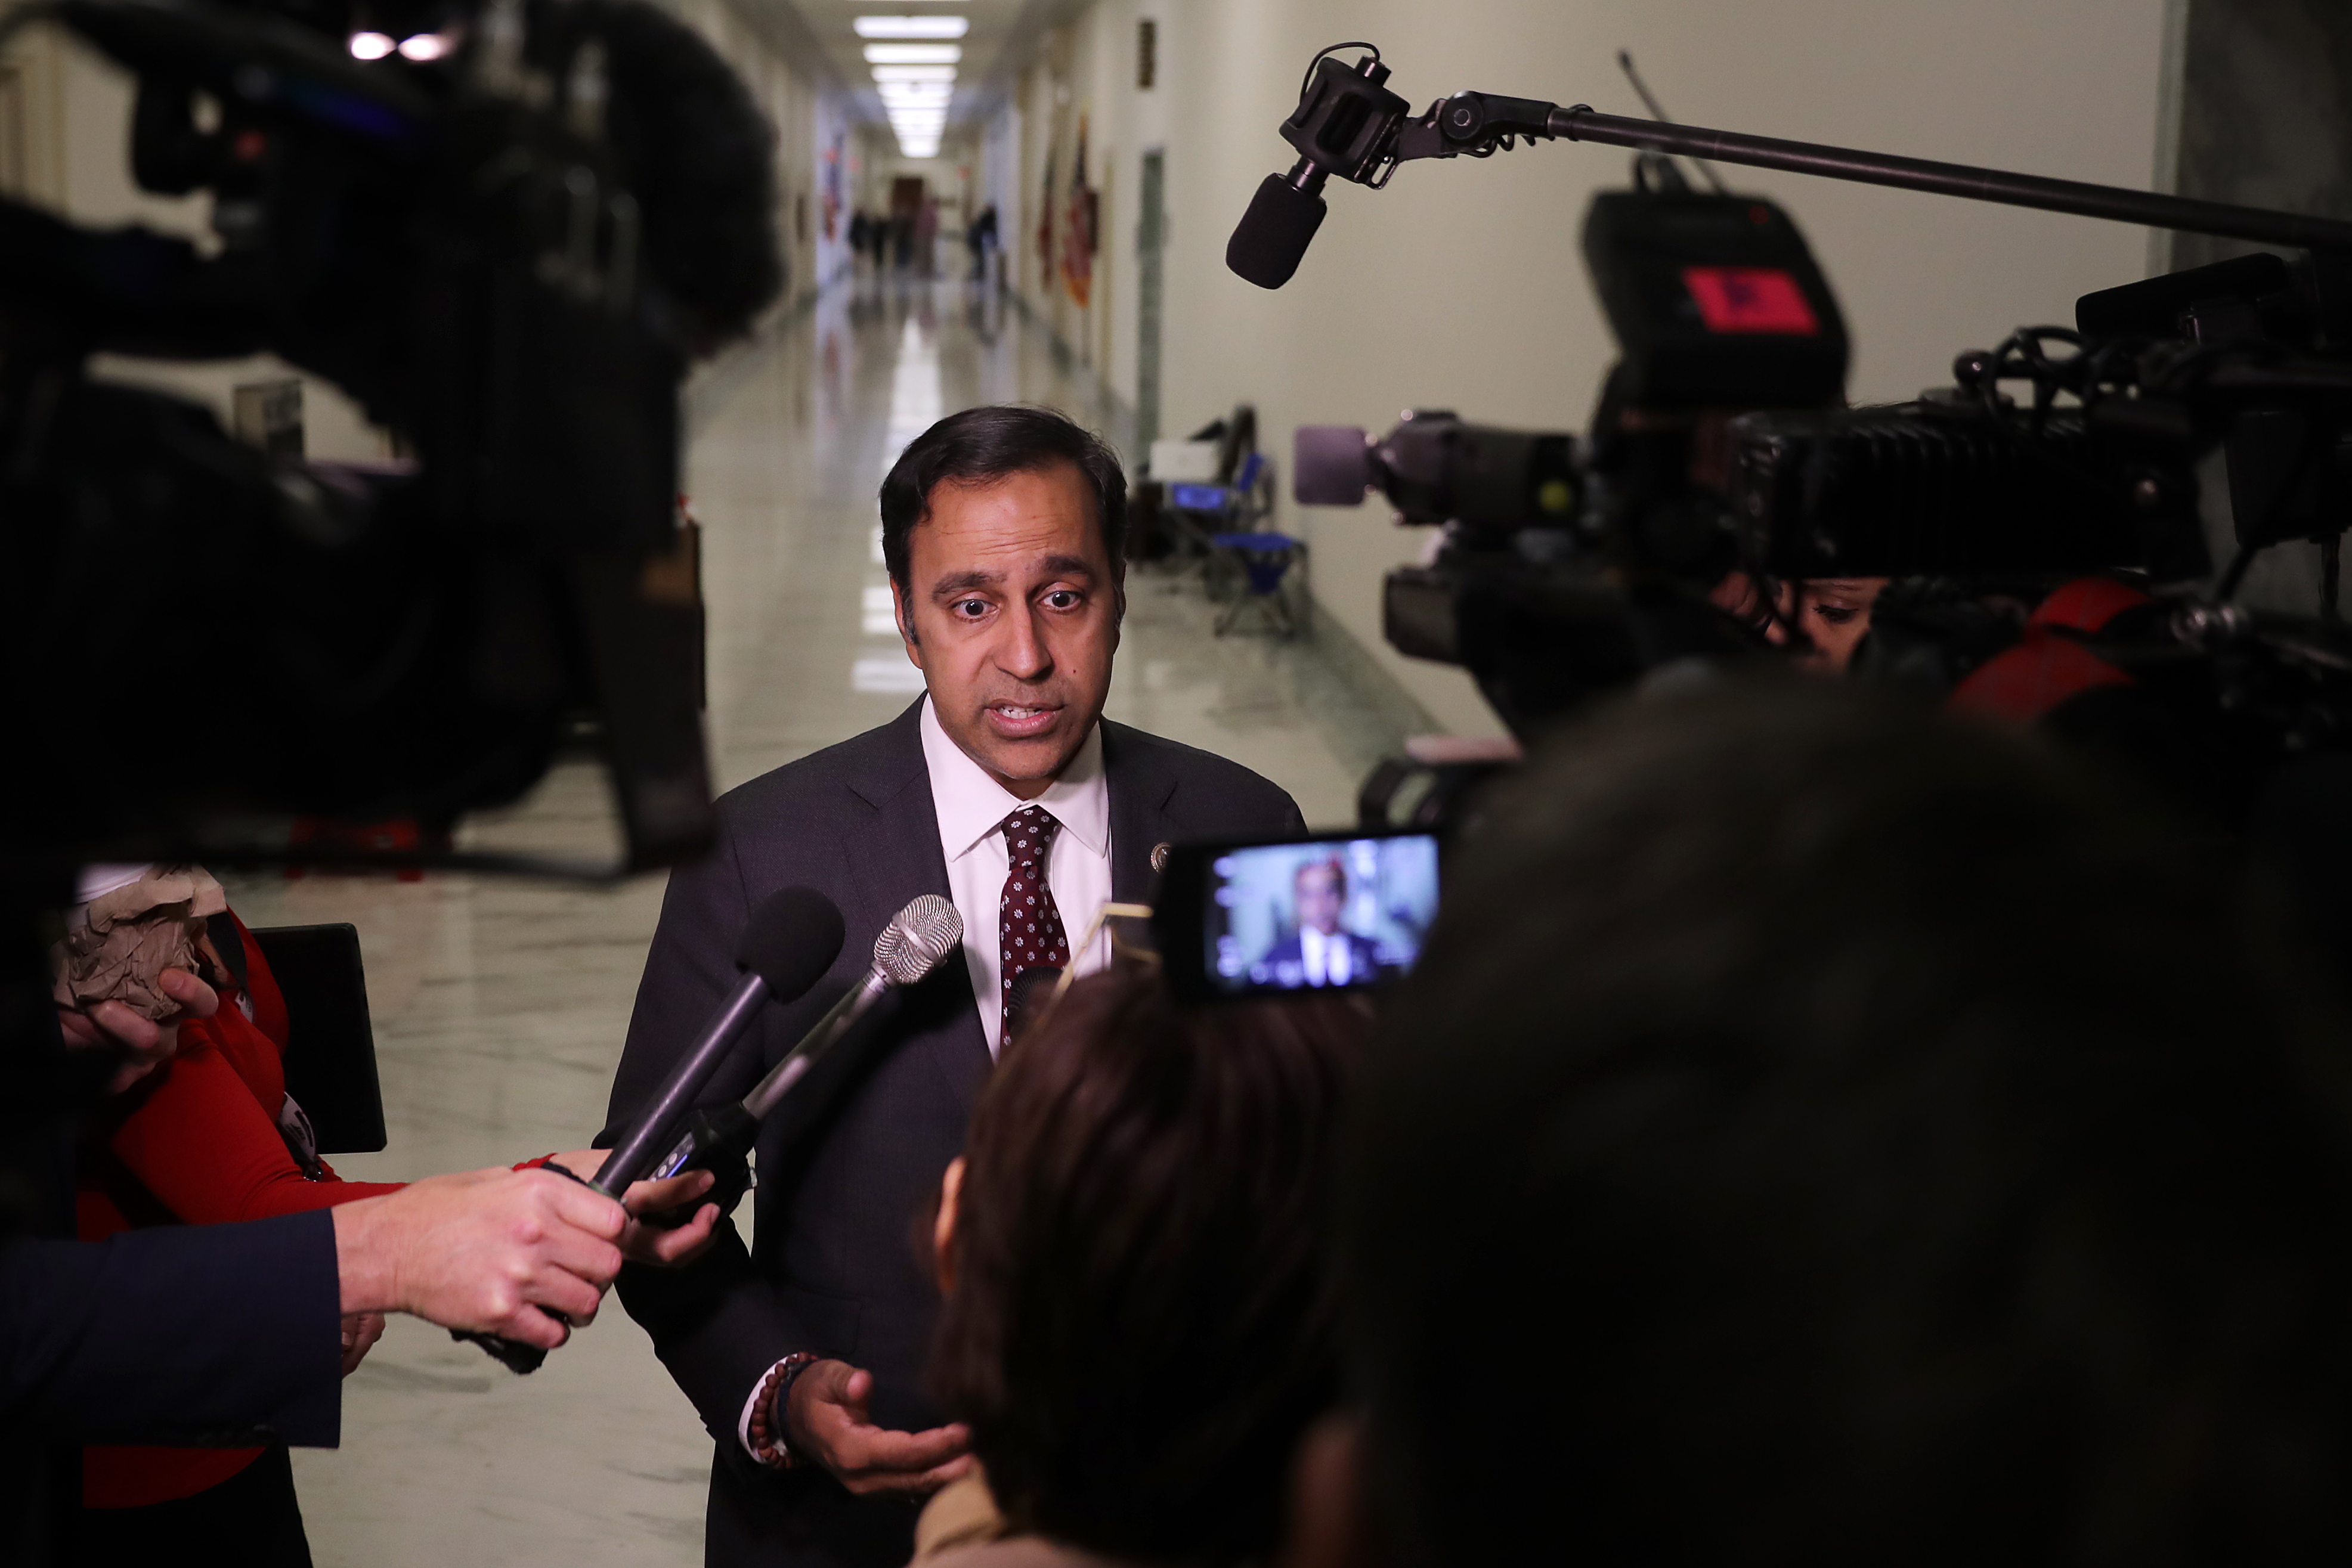 House Oversight and Government Reform Committee member Rep. Raja Krishnamoorthi talks to journalists during a break in a closed-door hearing in the Rayburn House Office Building on Capitol Hill October 19, 2018 in Washington, DC. (Photo by Chip Somodevilla/Getty Images)